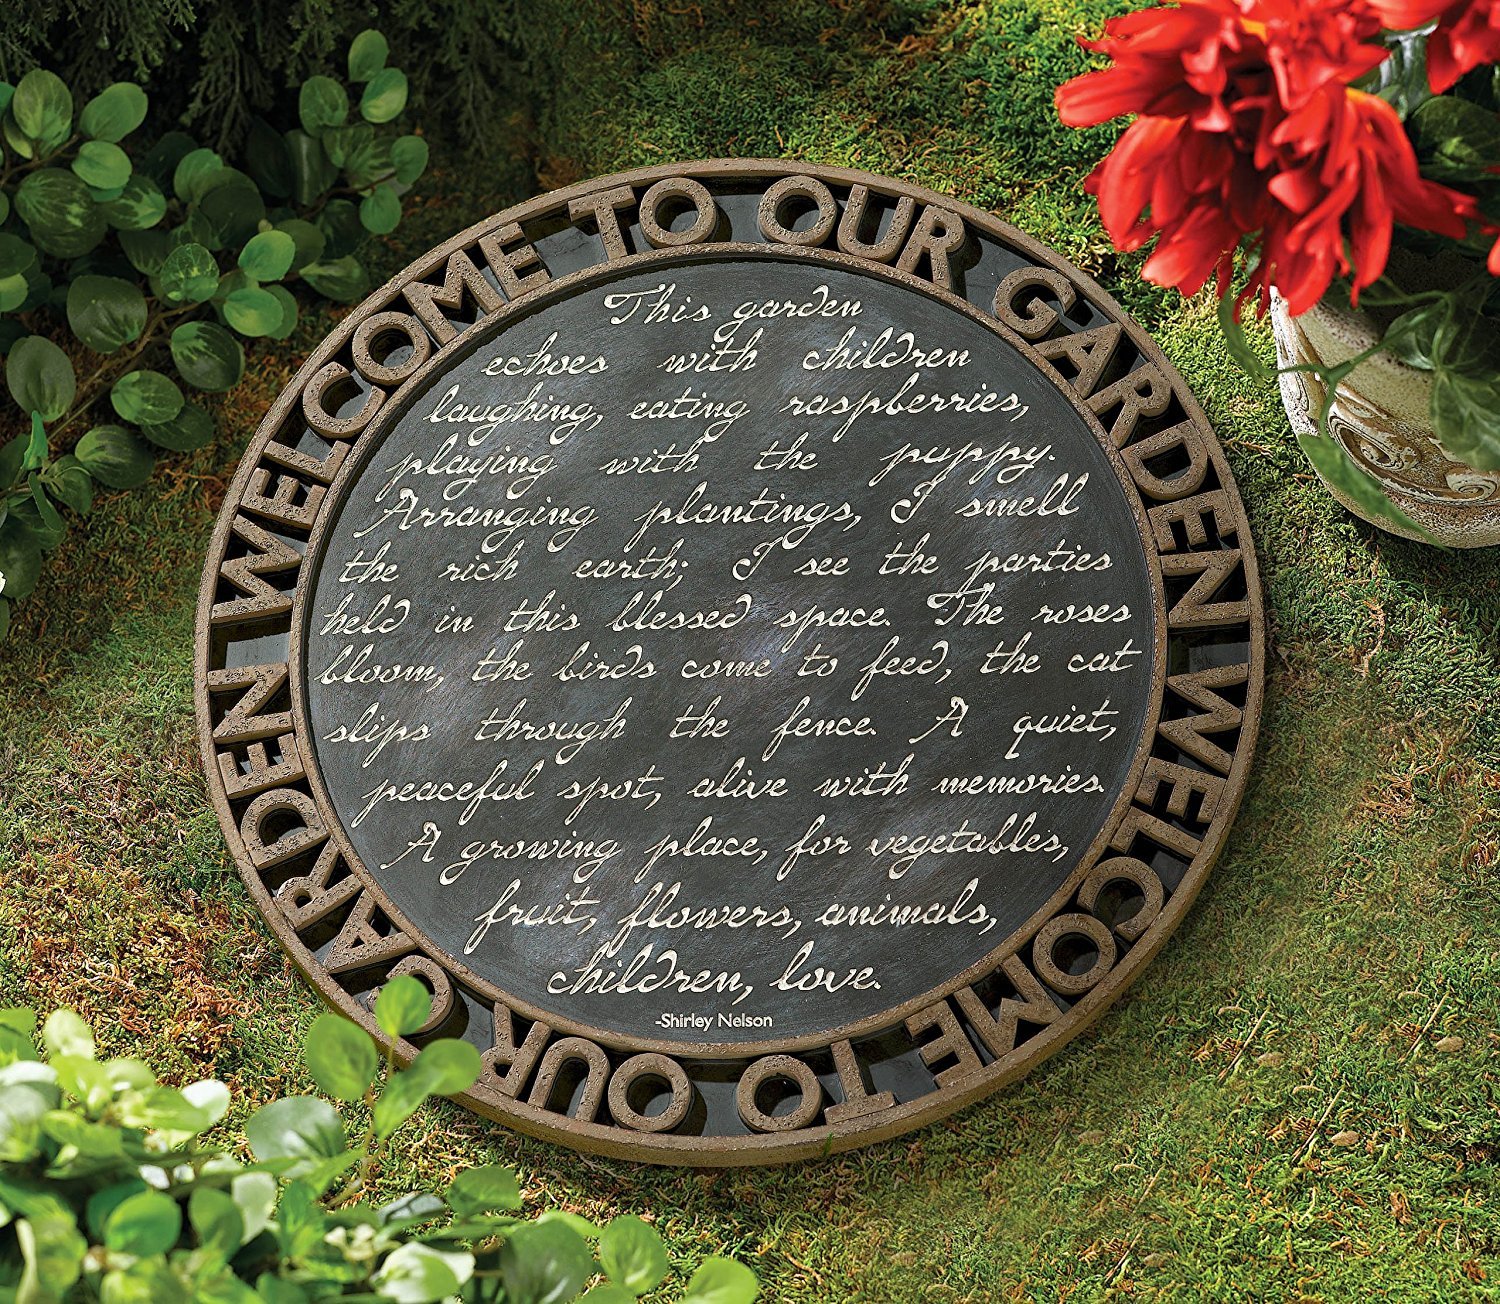 Grasslands Road Estate "Welcome to Our Garden" Script Motif Stepping Stone Plaque with Metal Stand - image 2 of 2